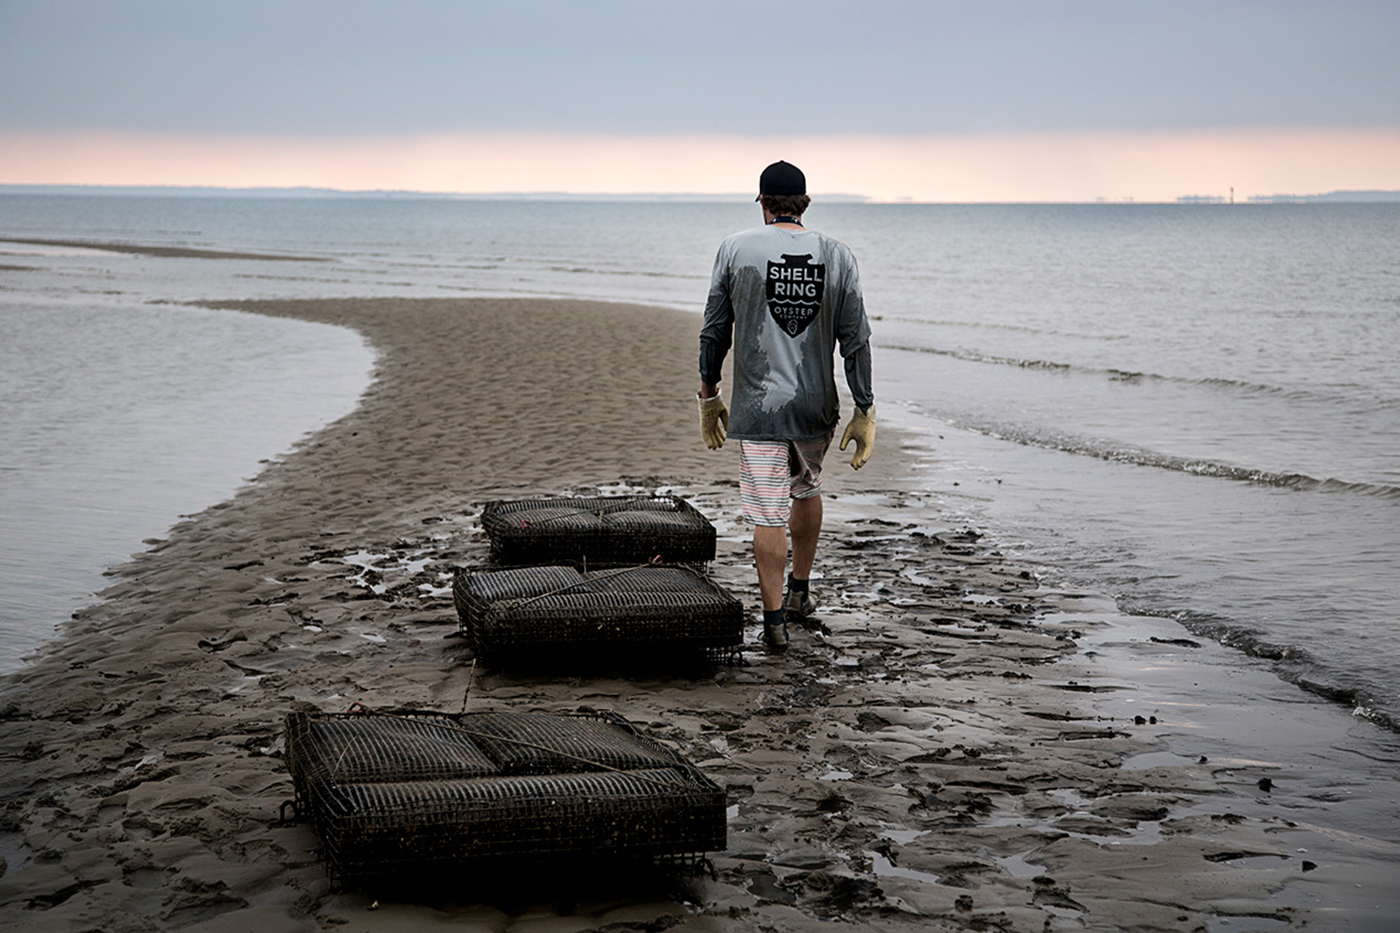 Editorial photography on location advertising oyster farmers.